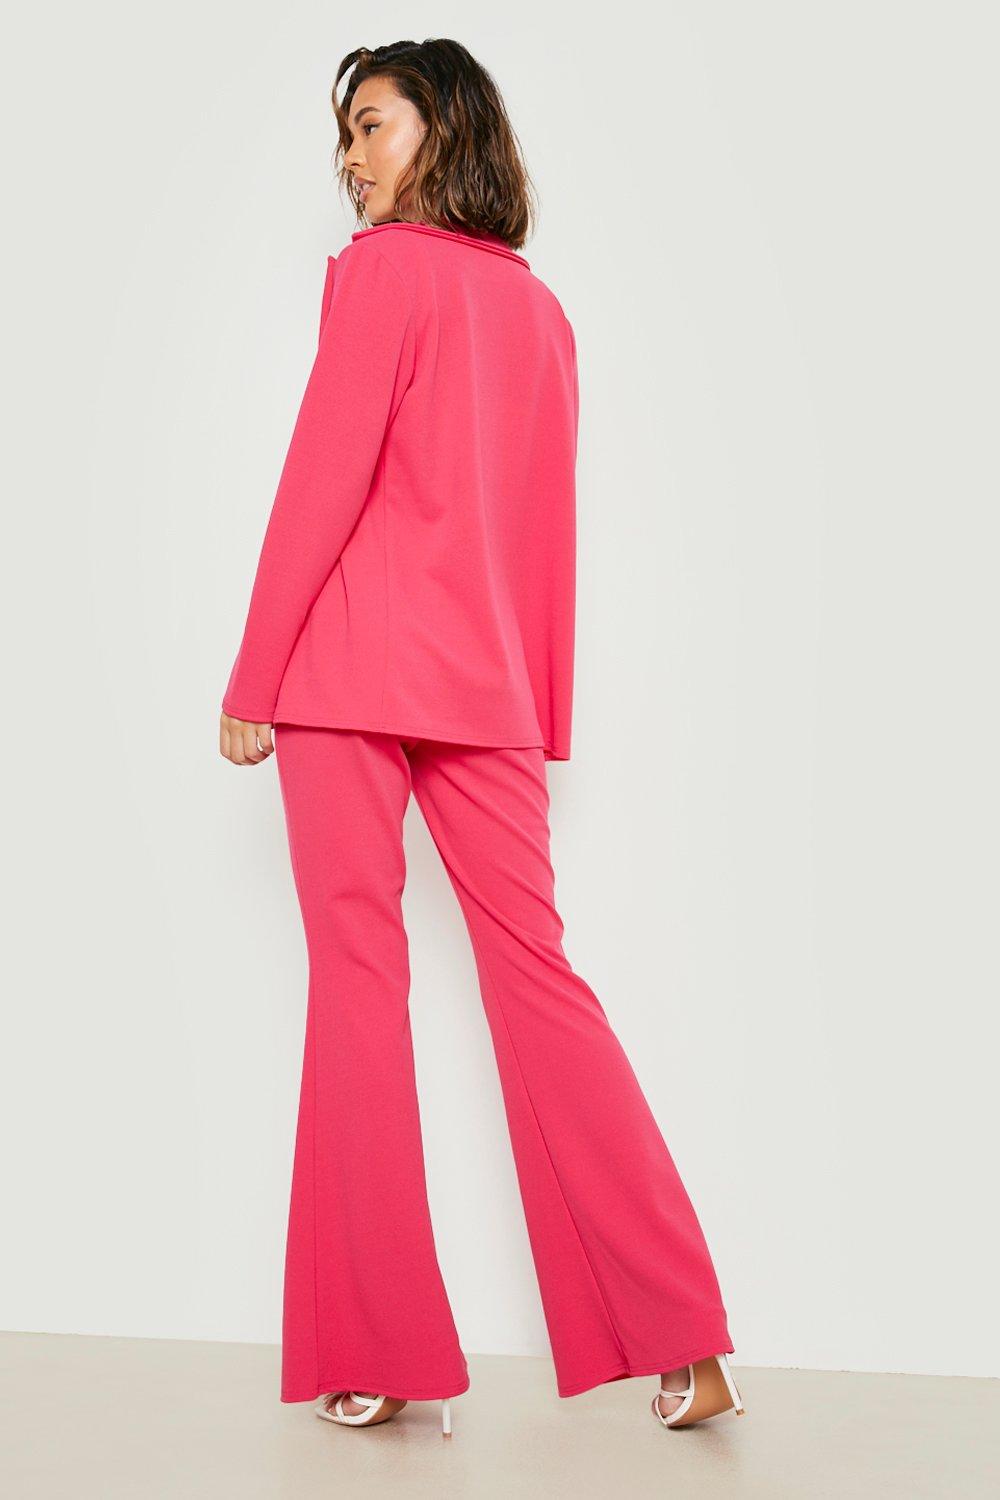 ASOS LUXE co-ord flared suit trousers in red